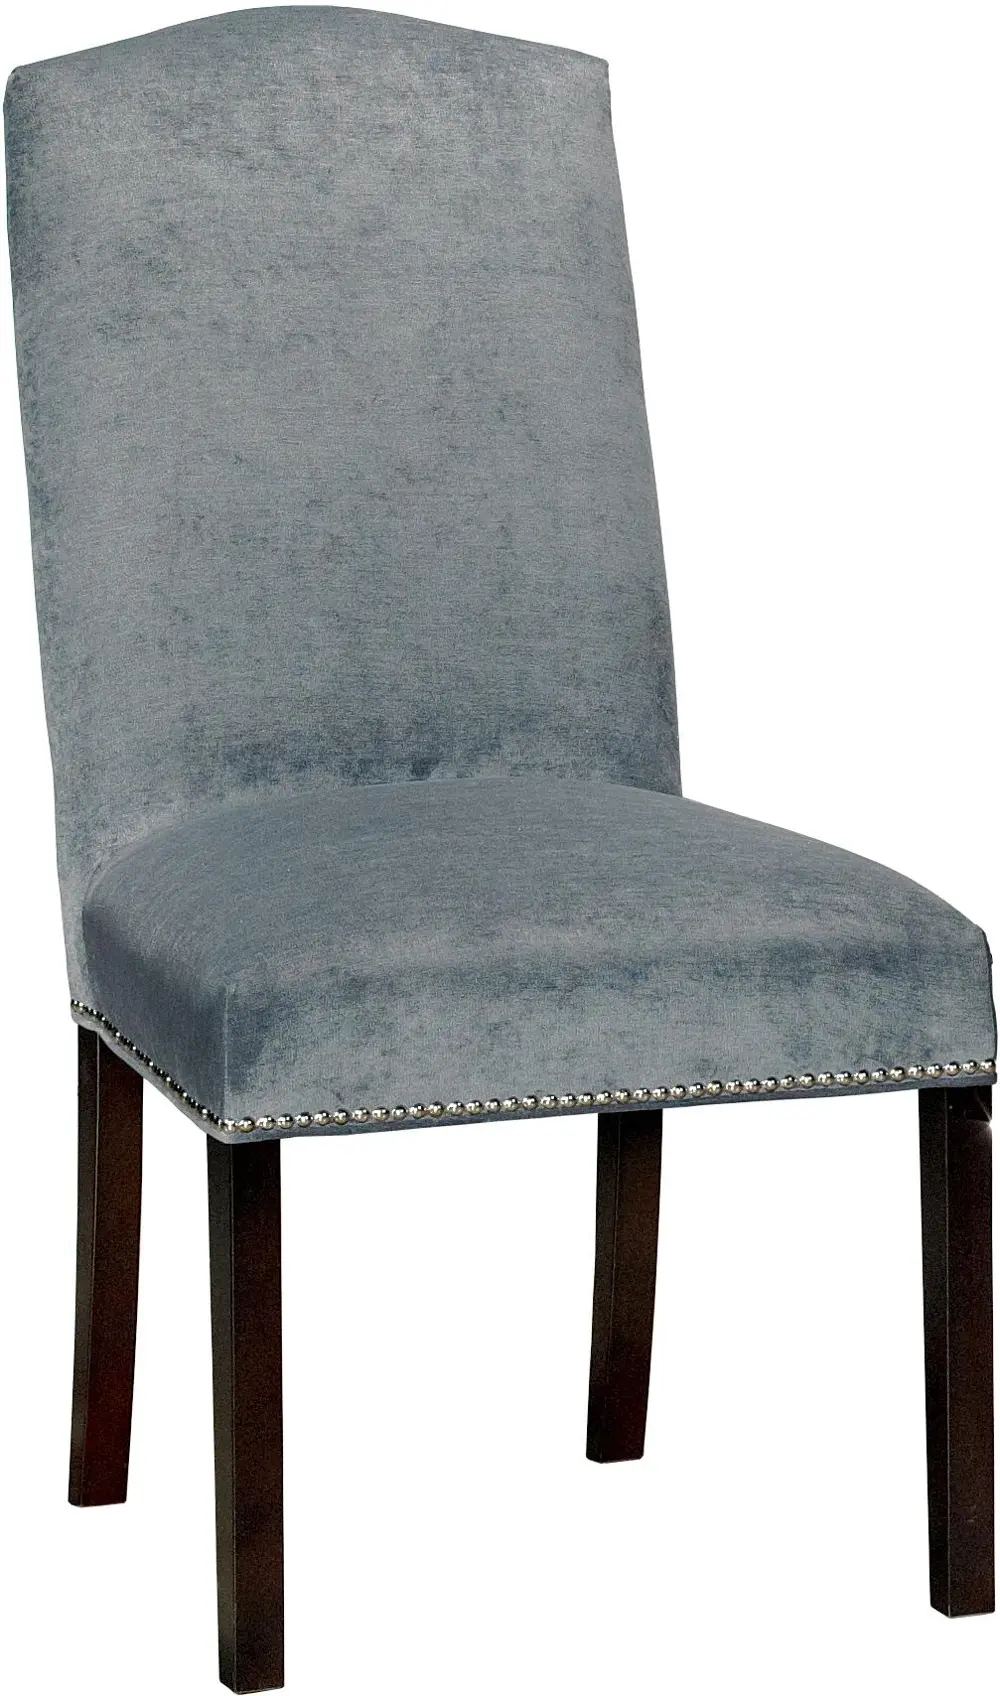 Parsons Sonoma Slate Dining Room Chair-1